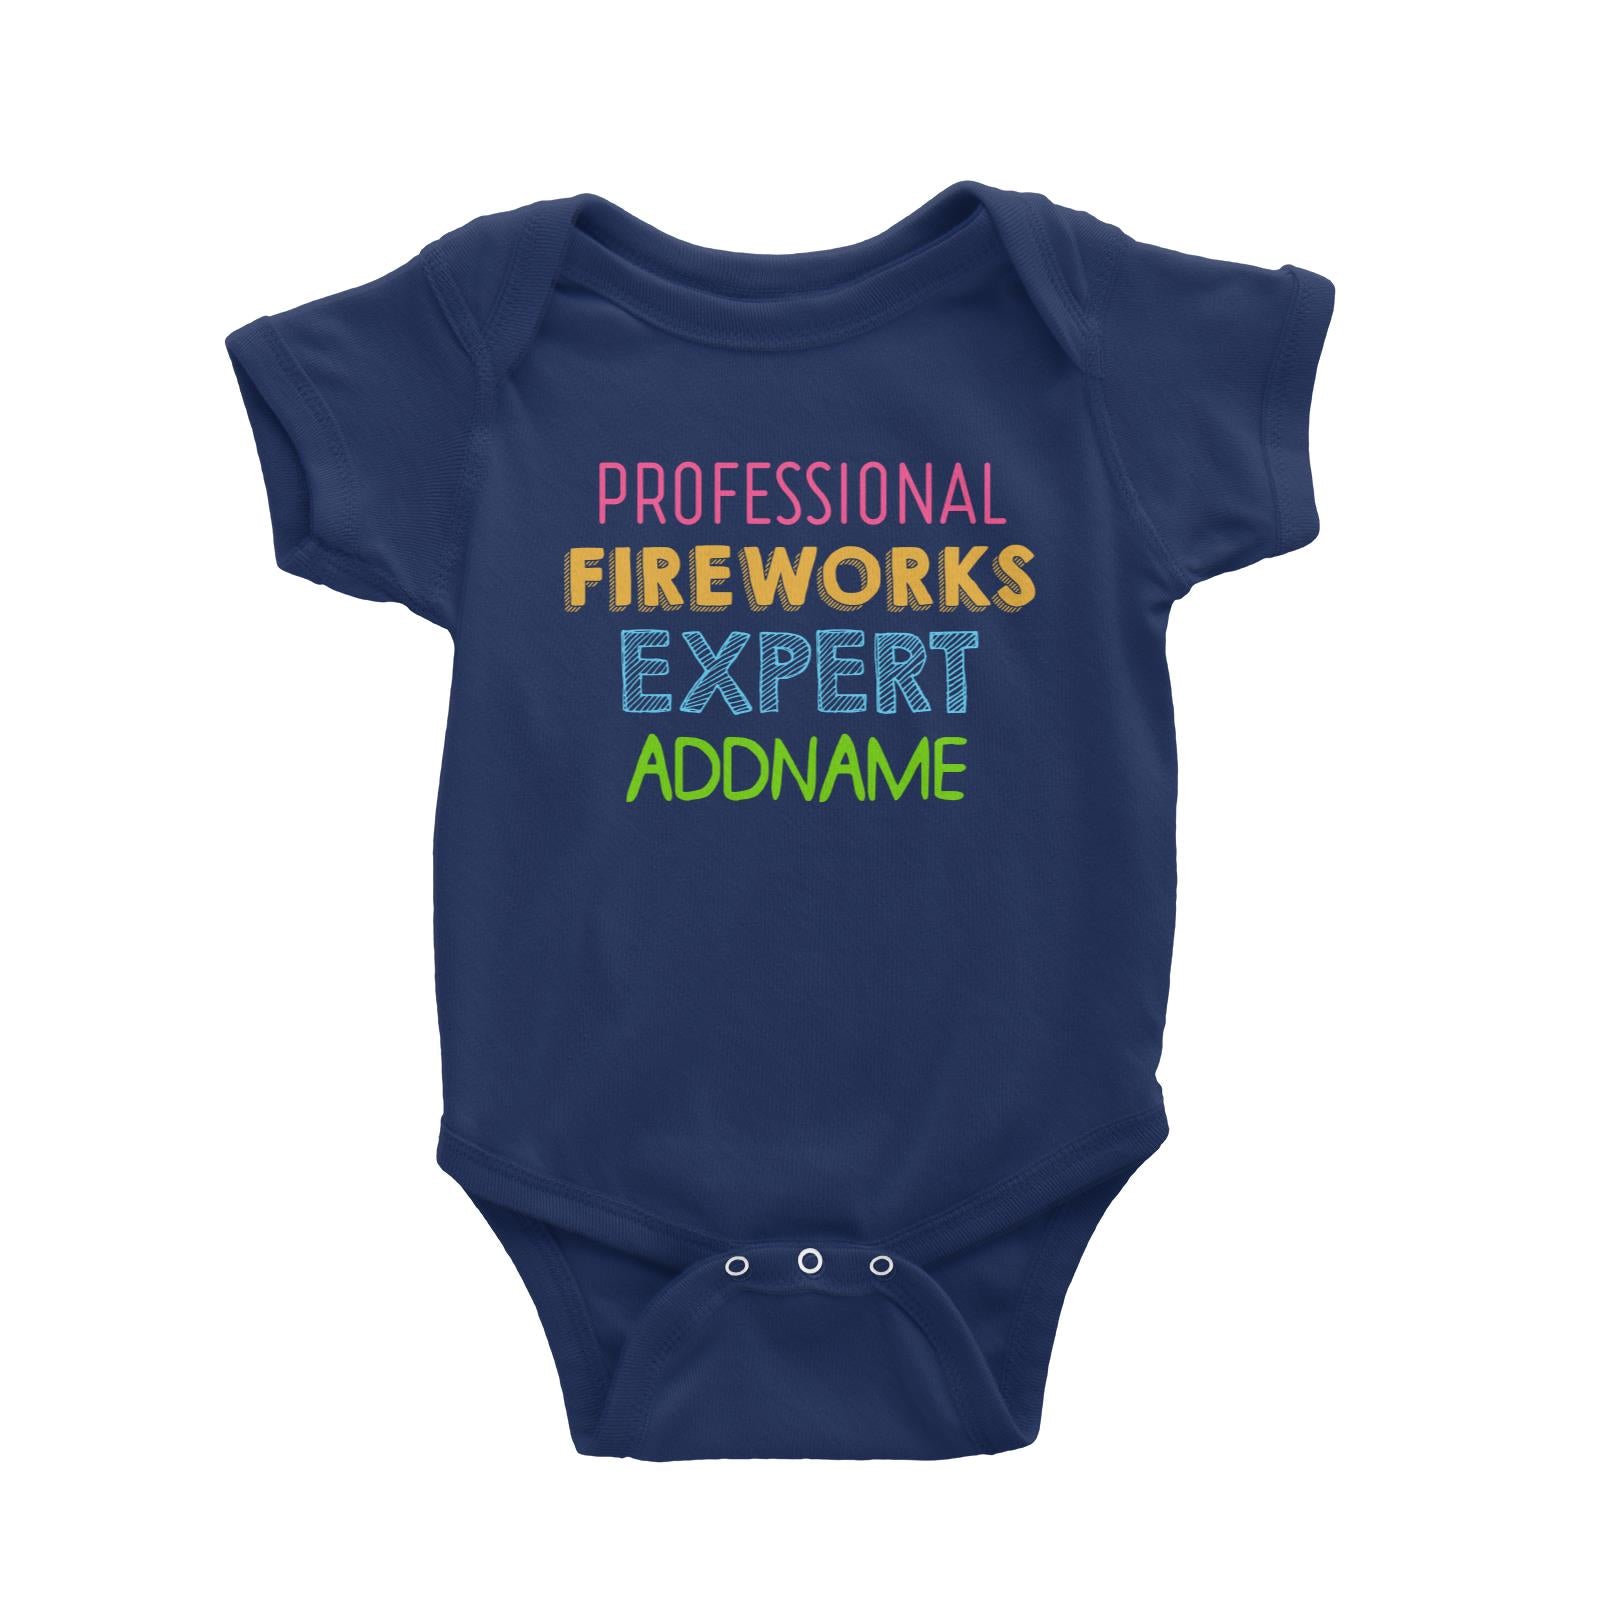 Professional Fireworks Expert Addname Baby Romper